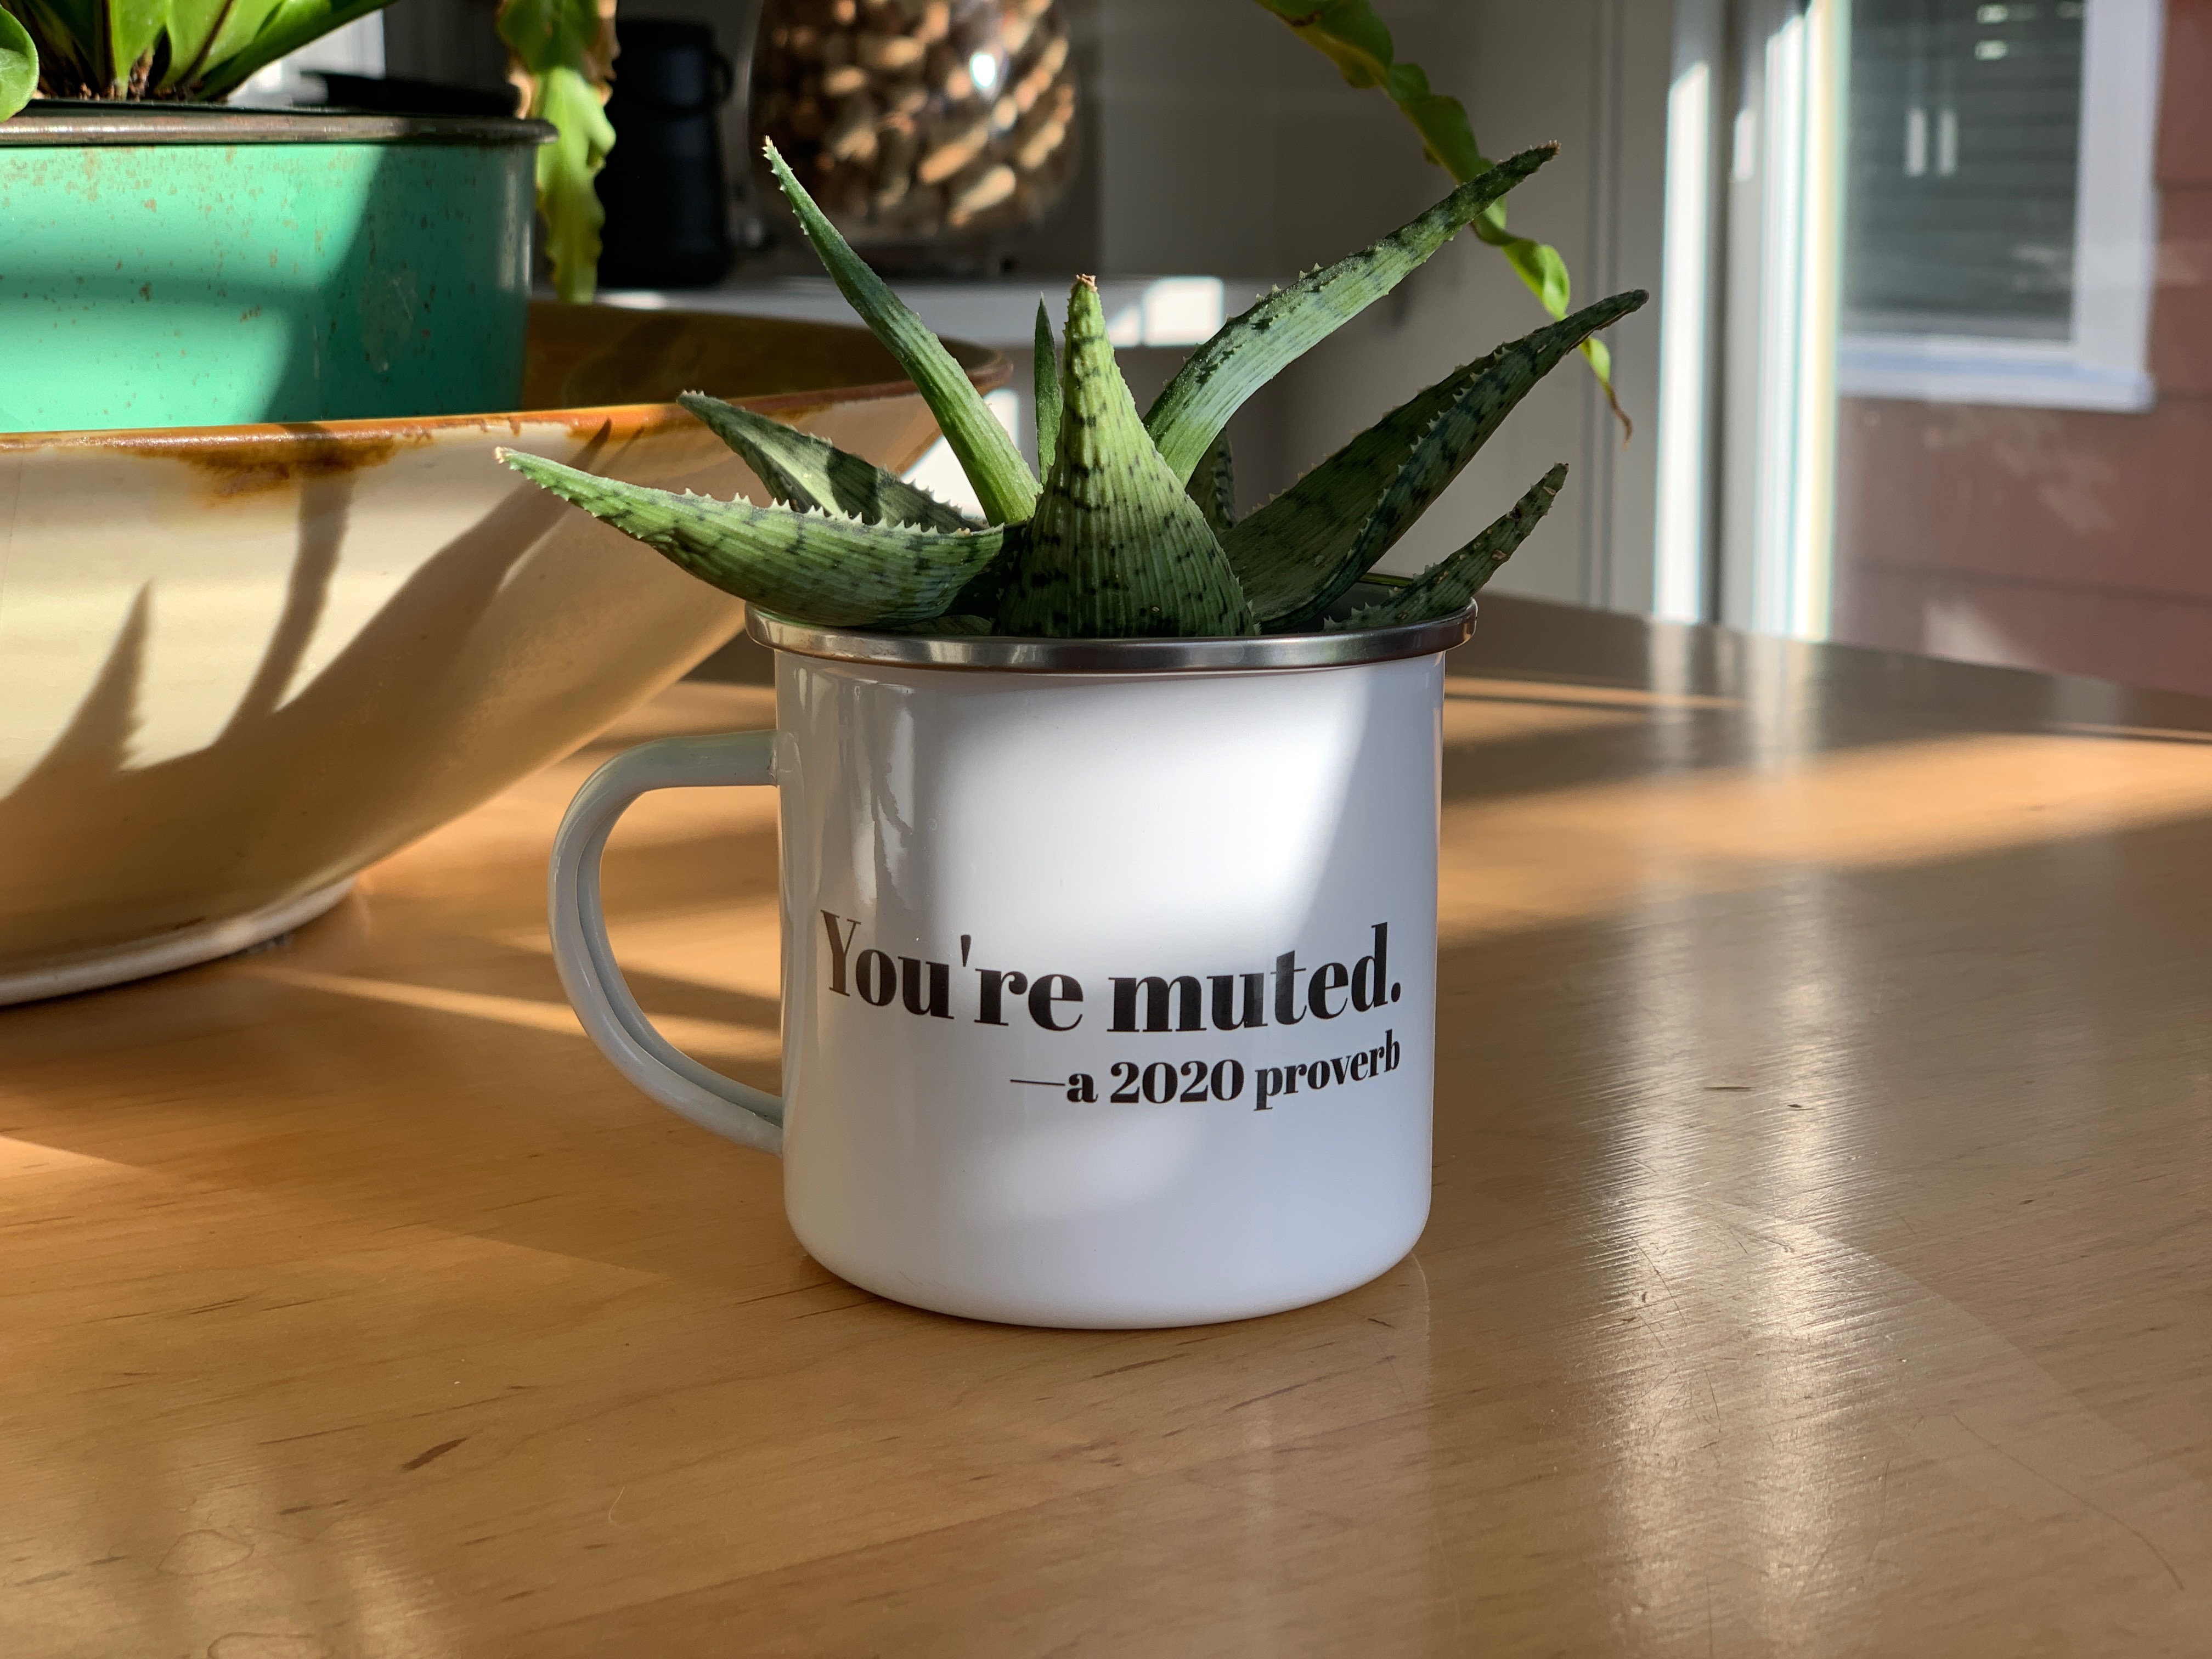 Muted Camp Mug made with sublimation printing